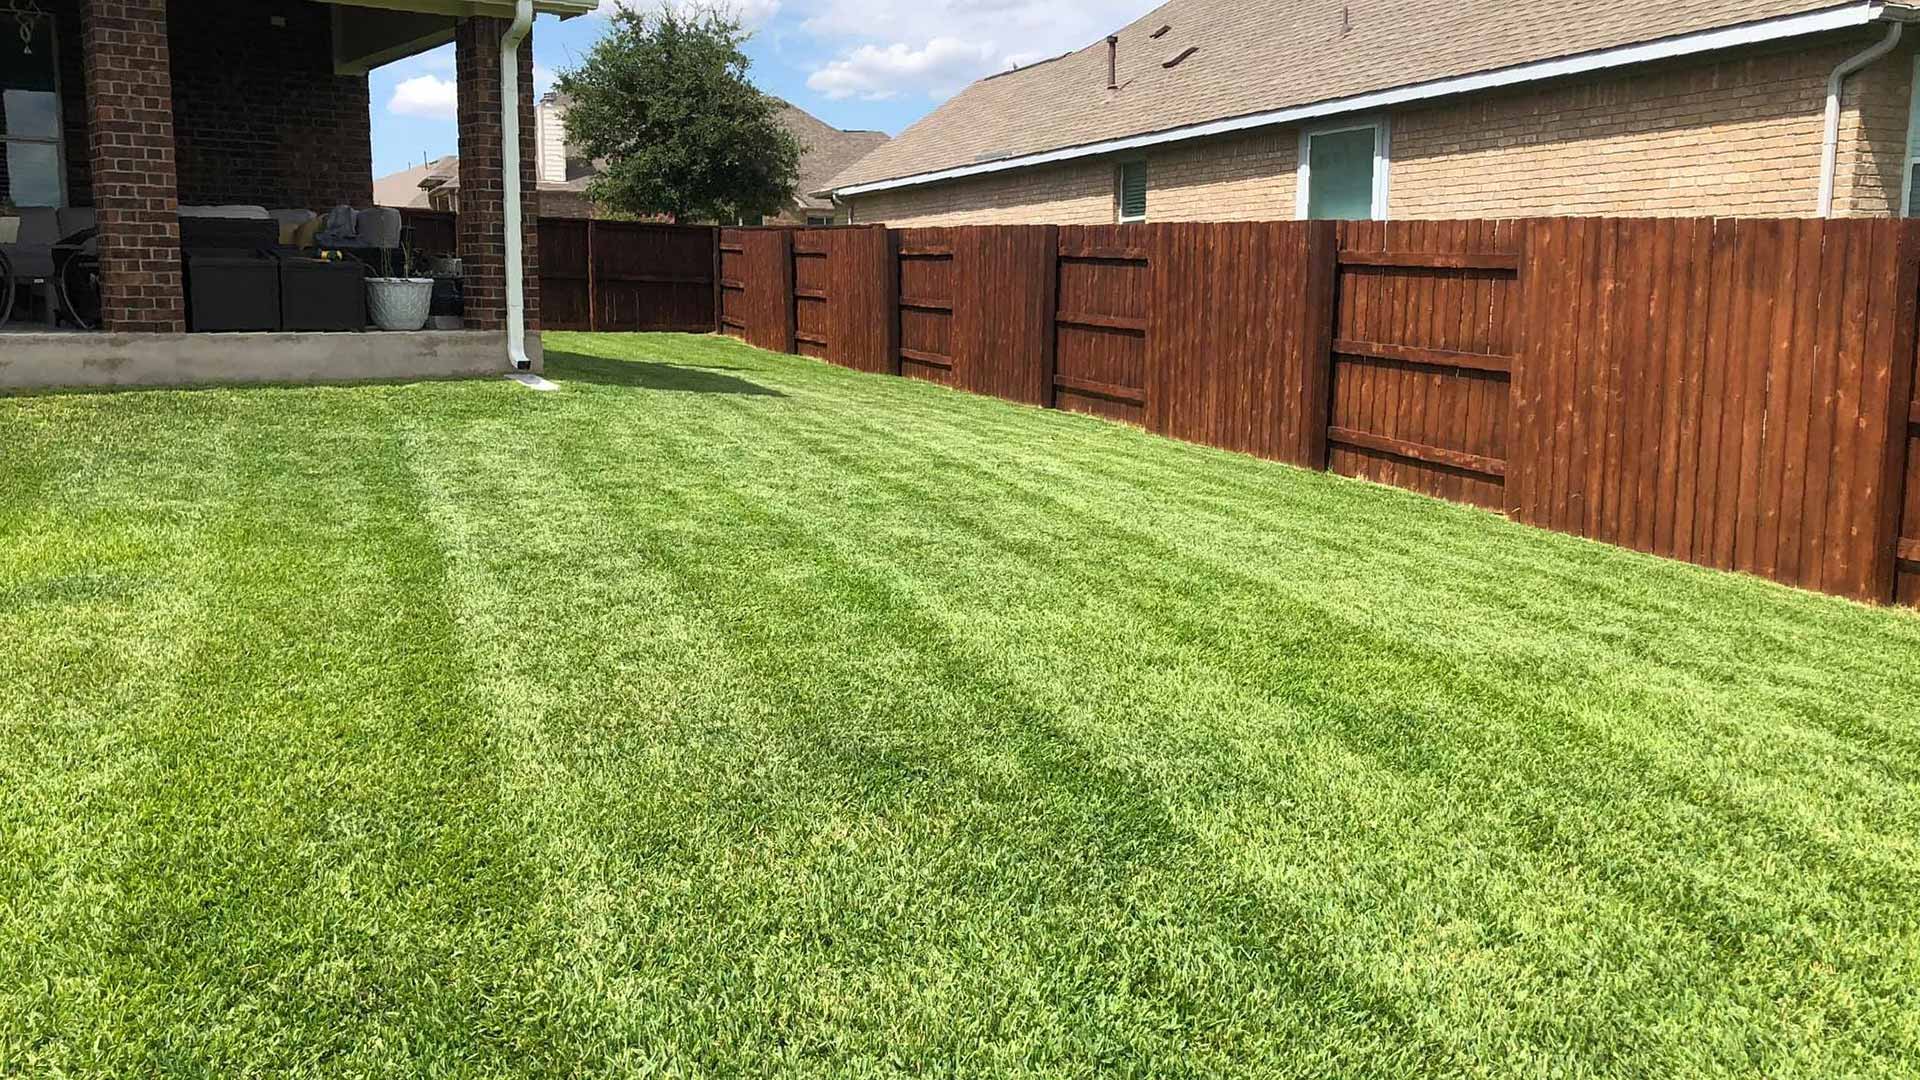 Backyard with red fencing and mowed lawn in Austin, TX.